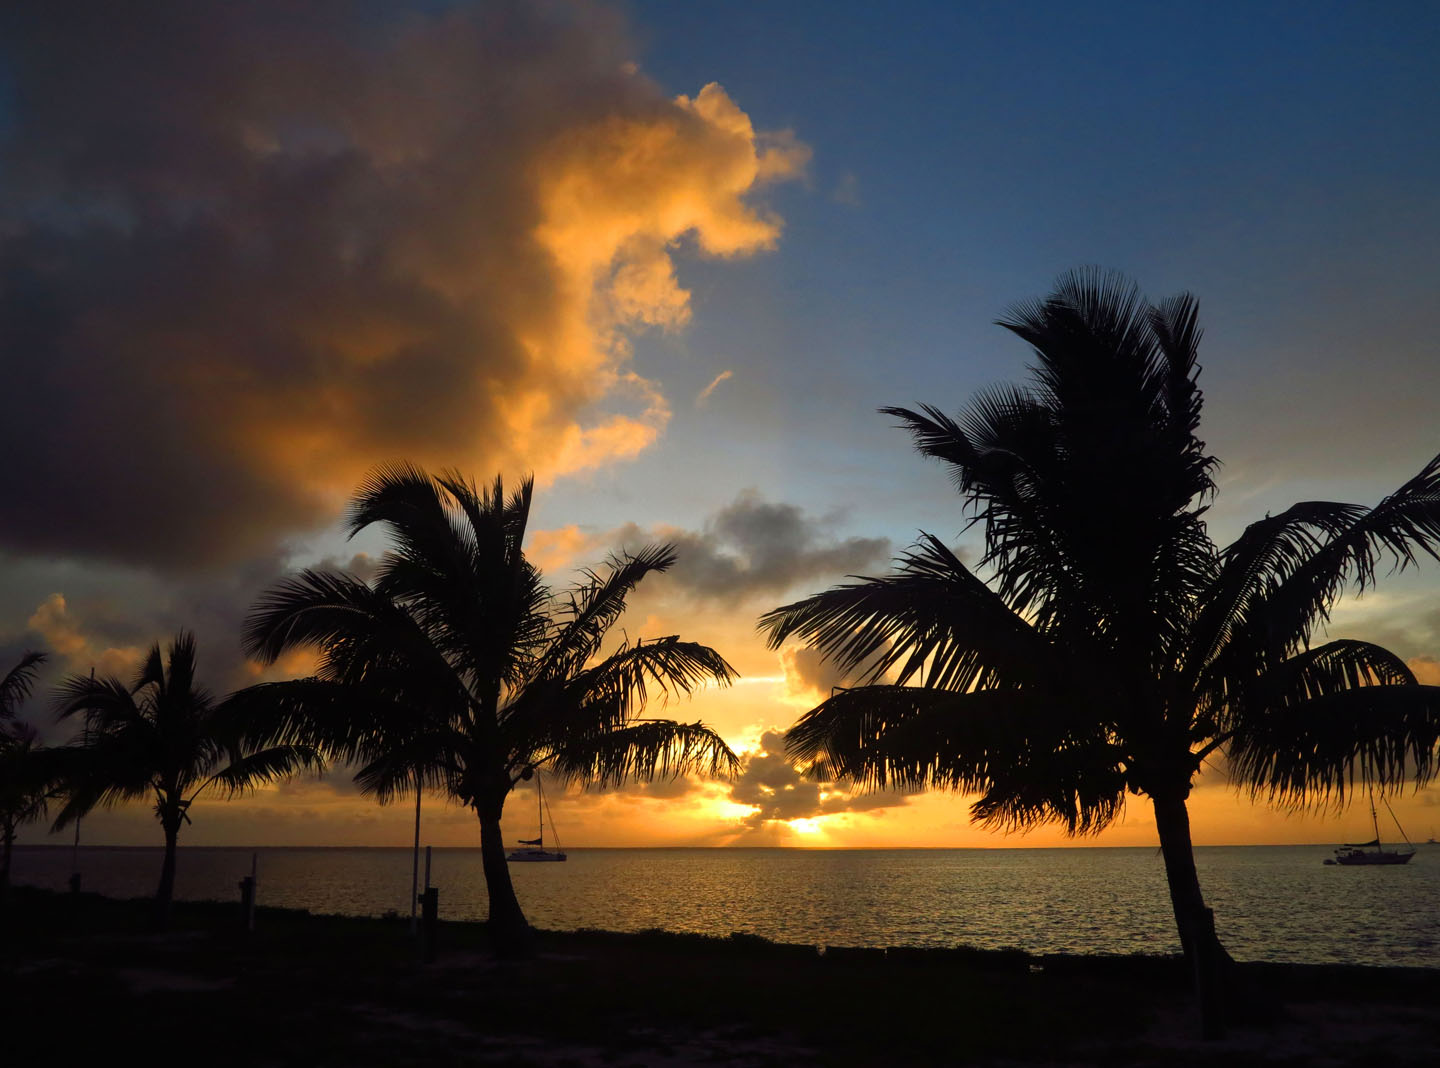 Sunset from Settlement Point, Green Turtle Cay, Bahamas.